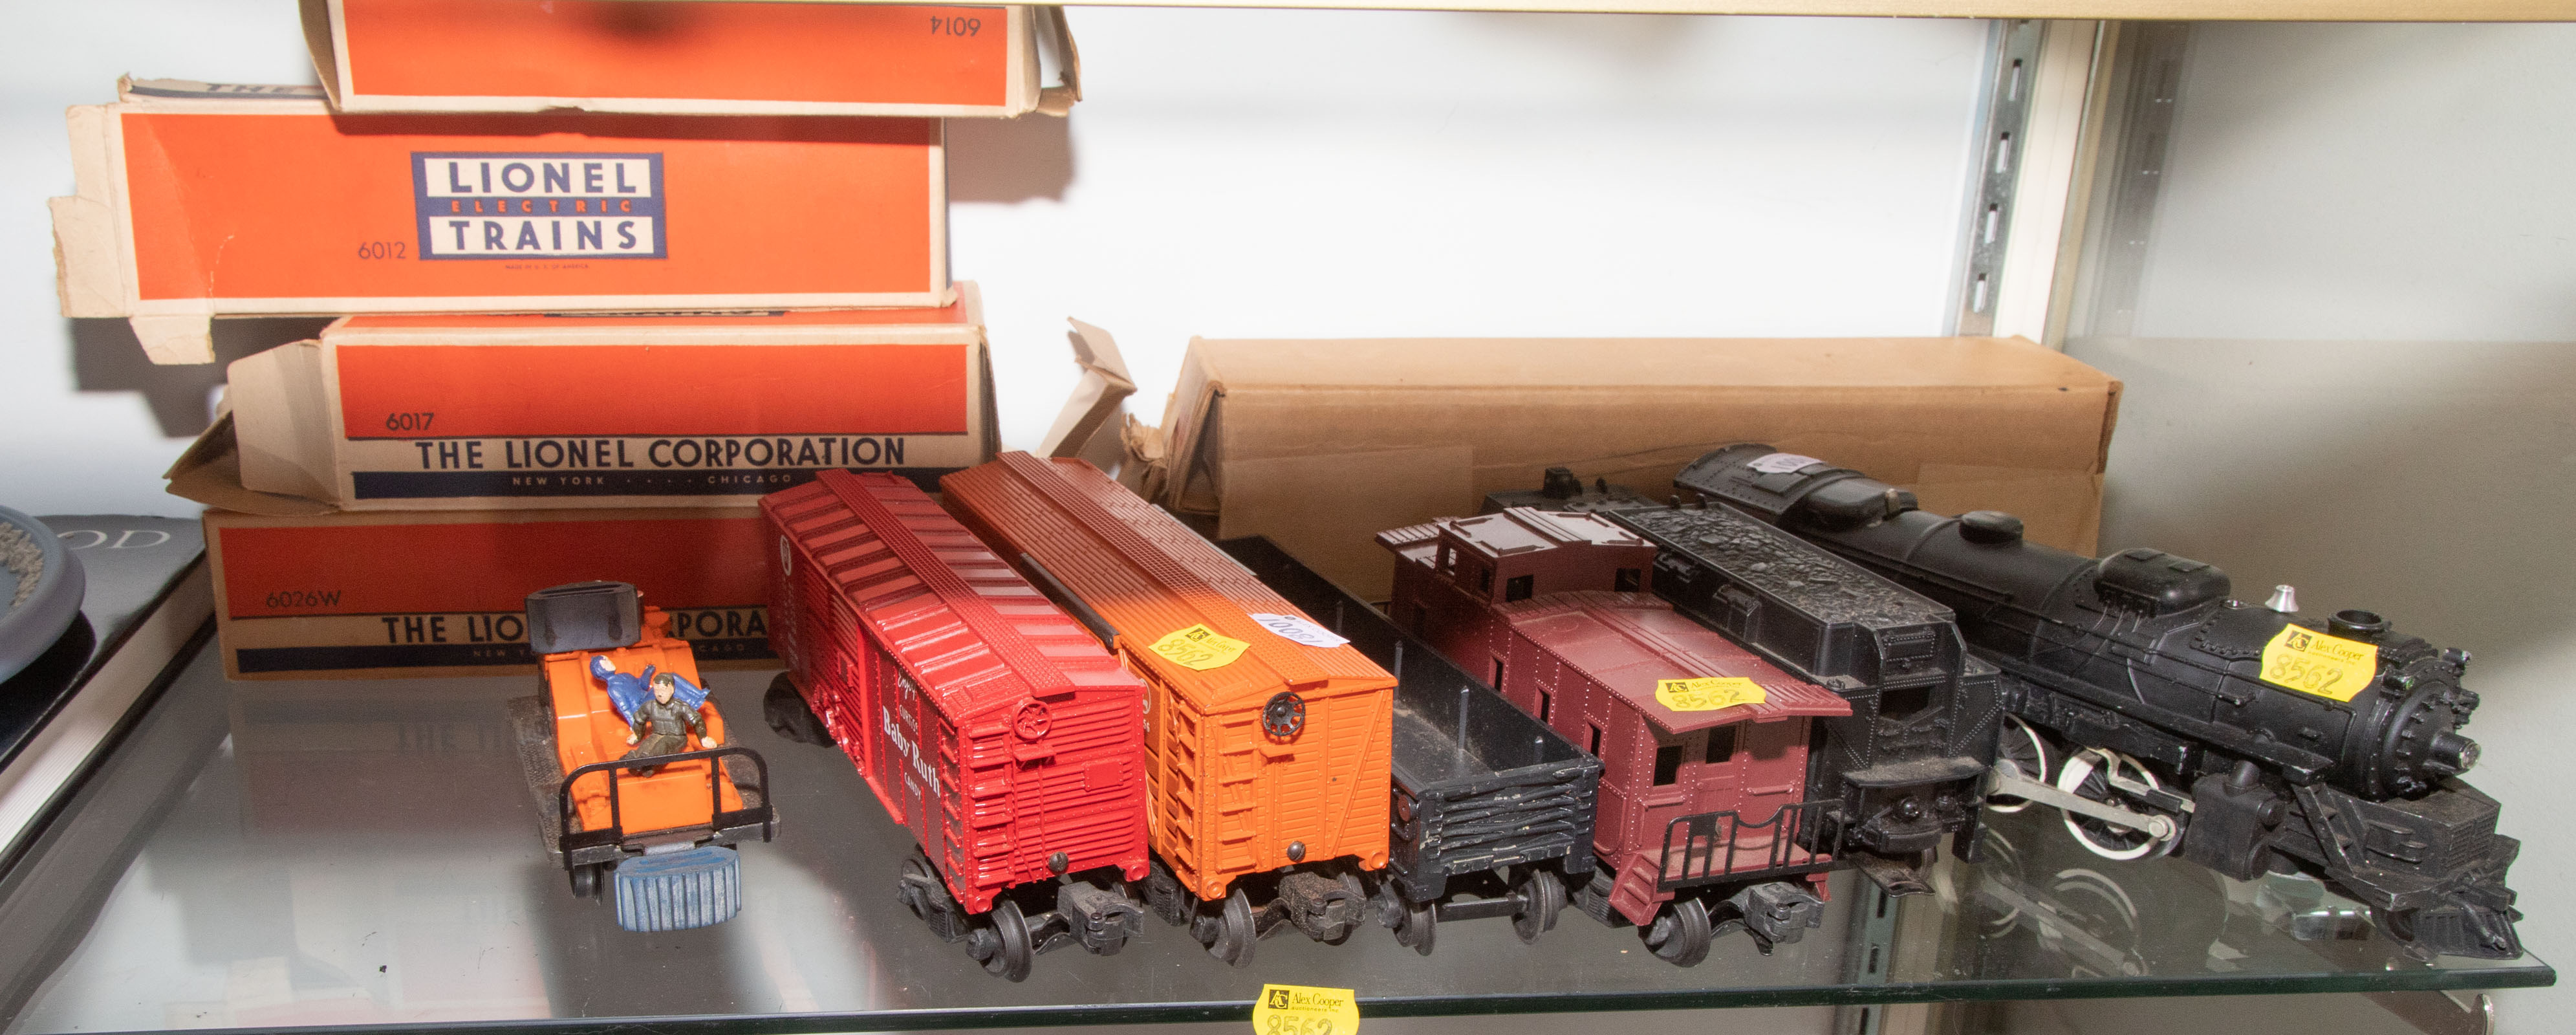 LIONEL 2016 TRAIN SET Most with boxes.